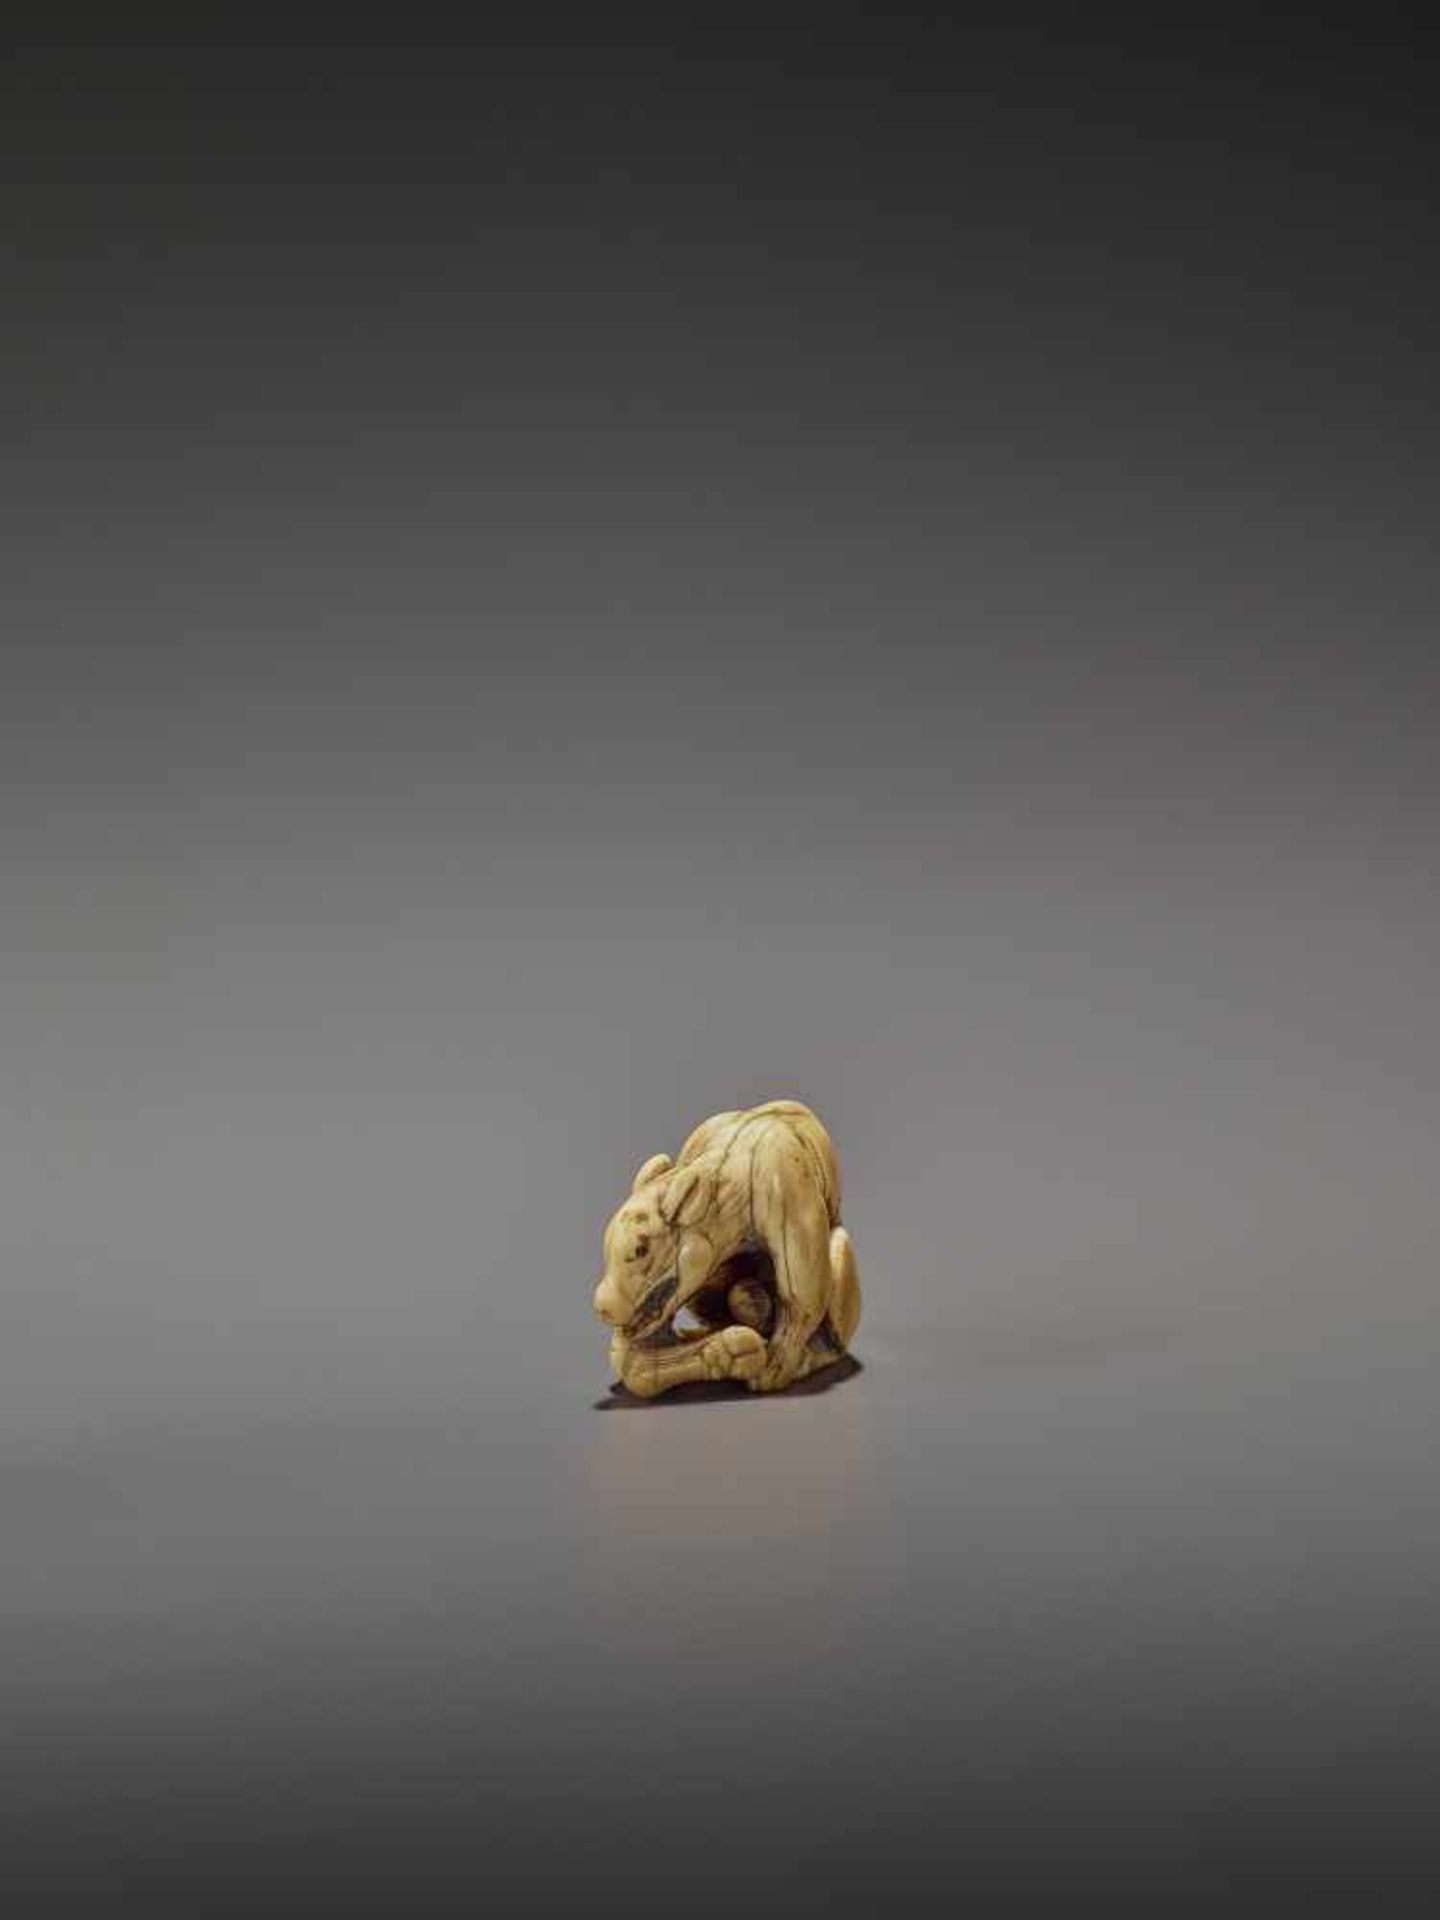 AN EARLY IVORY NETSUKE OF A WOLF WITH HAUNCH UnsignedJapan, Kyoto, 18th century, Edo period (1615- - Image 5 of 10